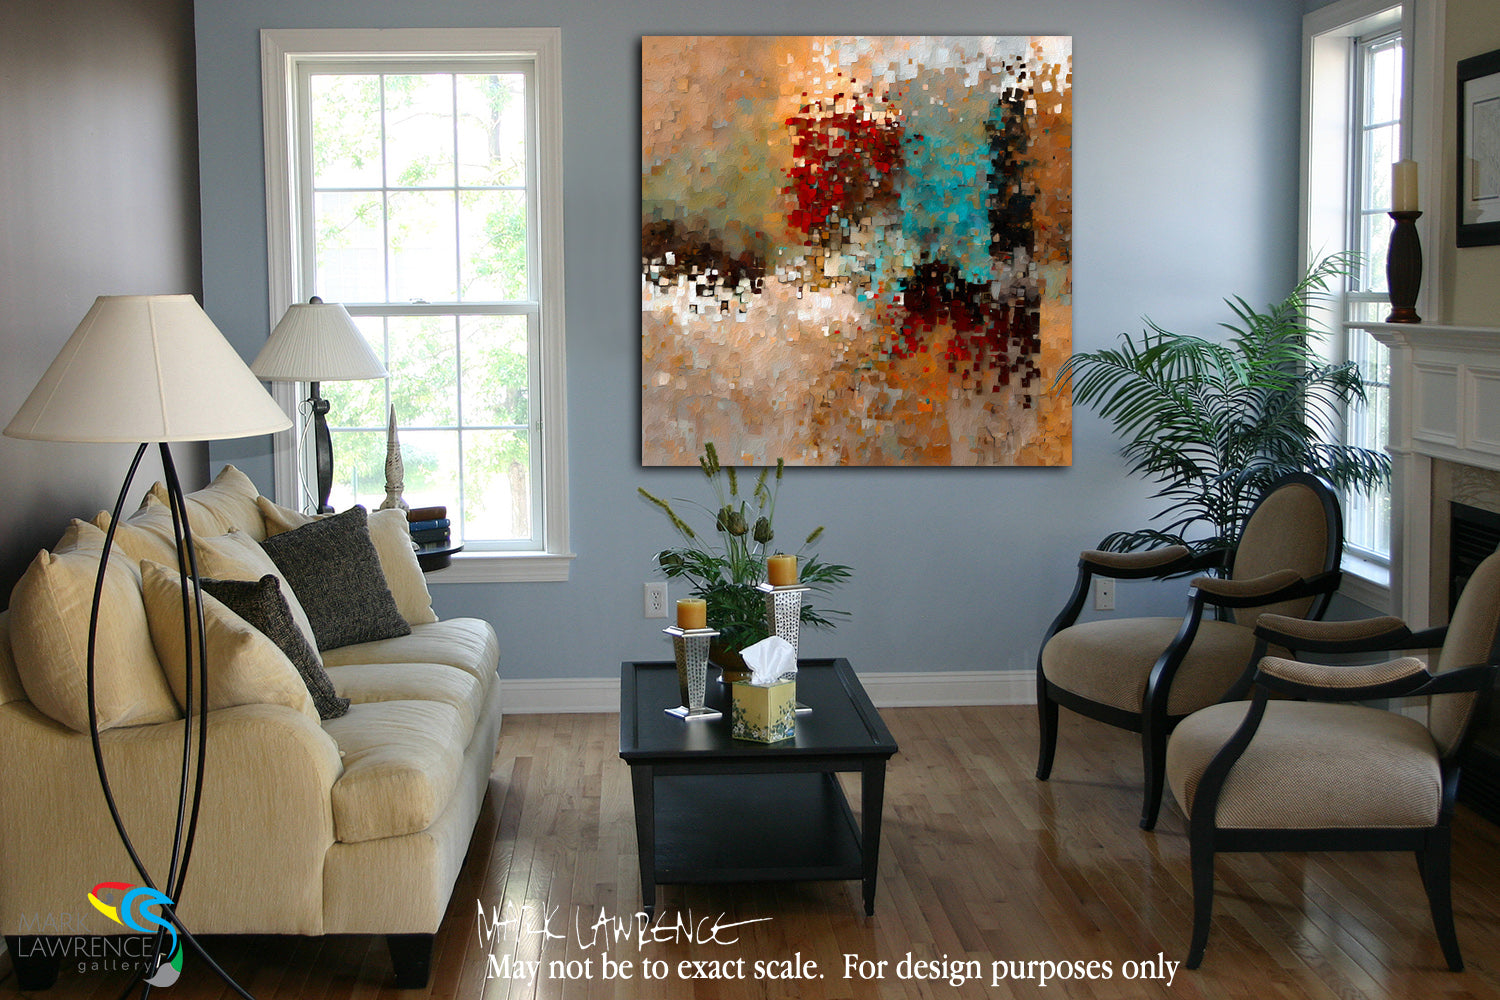 Interior Design Inspiration- John 6:68. The Way to Forever. Limited Edition Christian Modern Art. Hand embellished & textured giclee paintings with bold brush strokes by the artist. Signed & numbered. Museum quality on canvas wall art prints. Let us hold fast to the truth that Jesus Christ is the only way to eternal life.